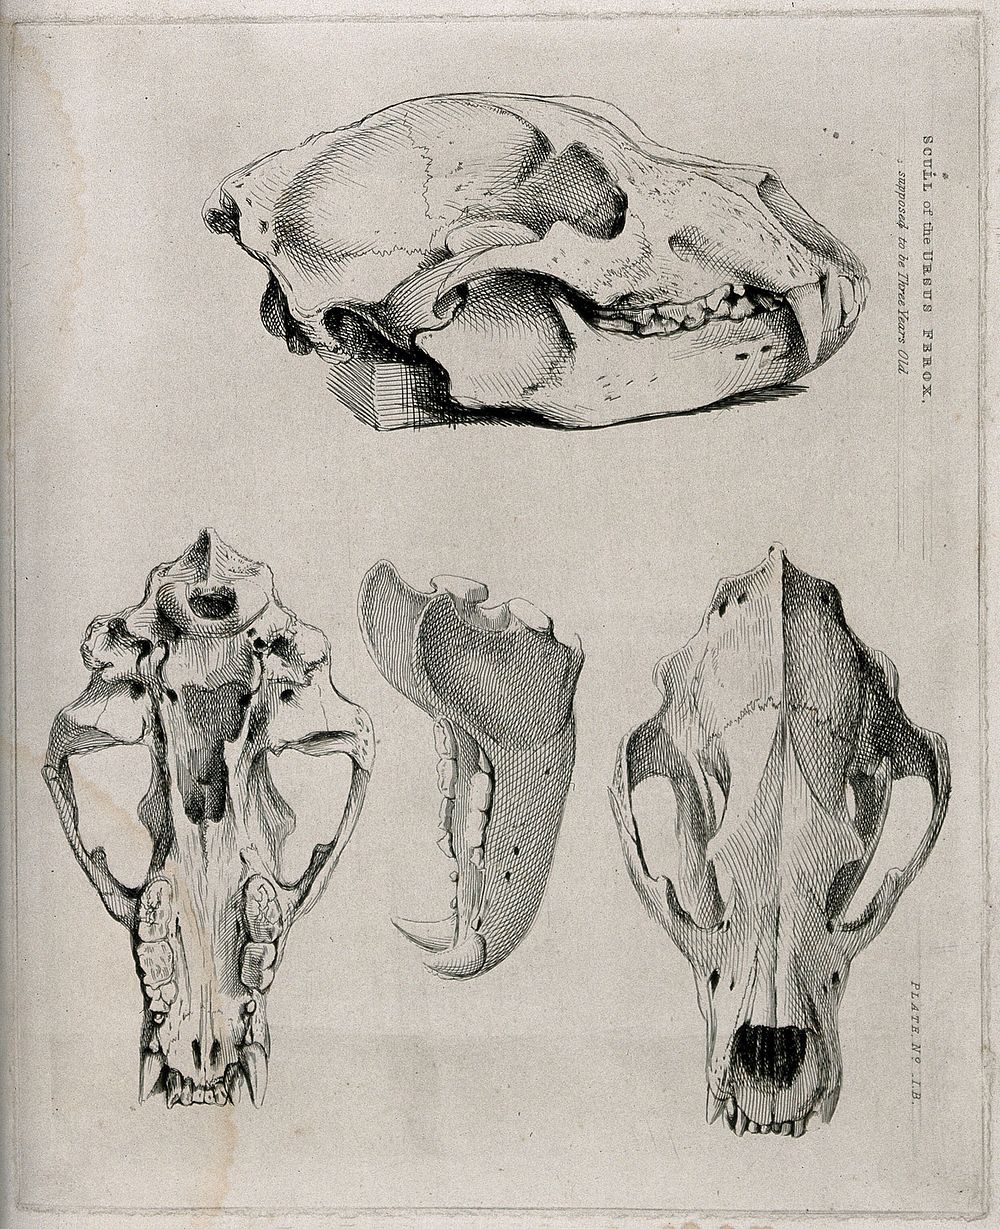 Skull of a three-year-old brown bear: four figures, showing the skull and jaw-bones. Etching, 1840/1870.